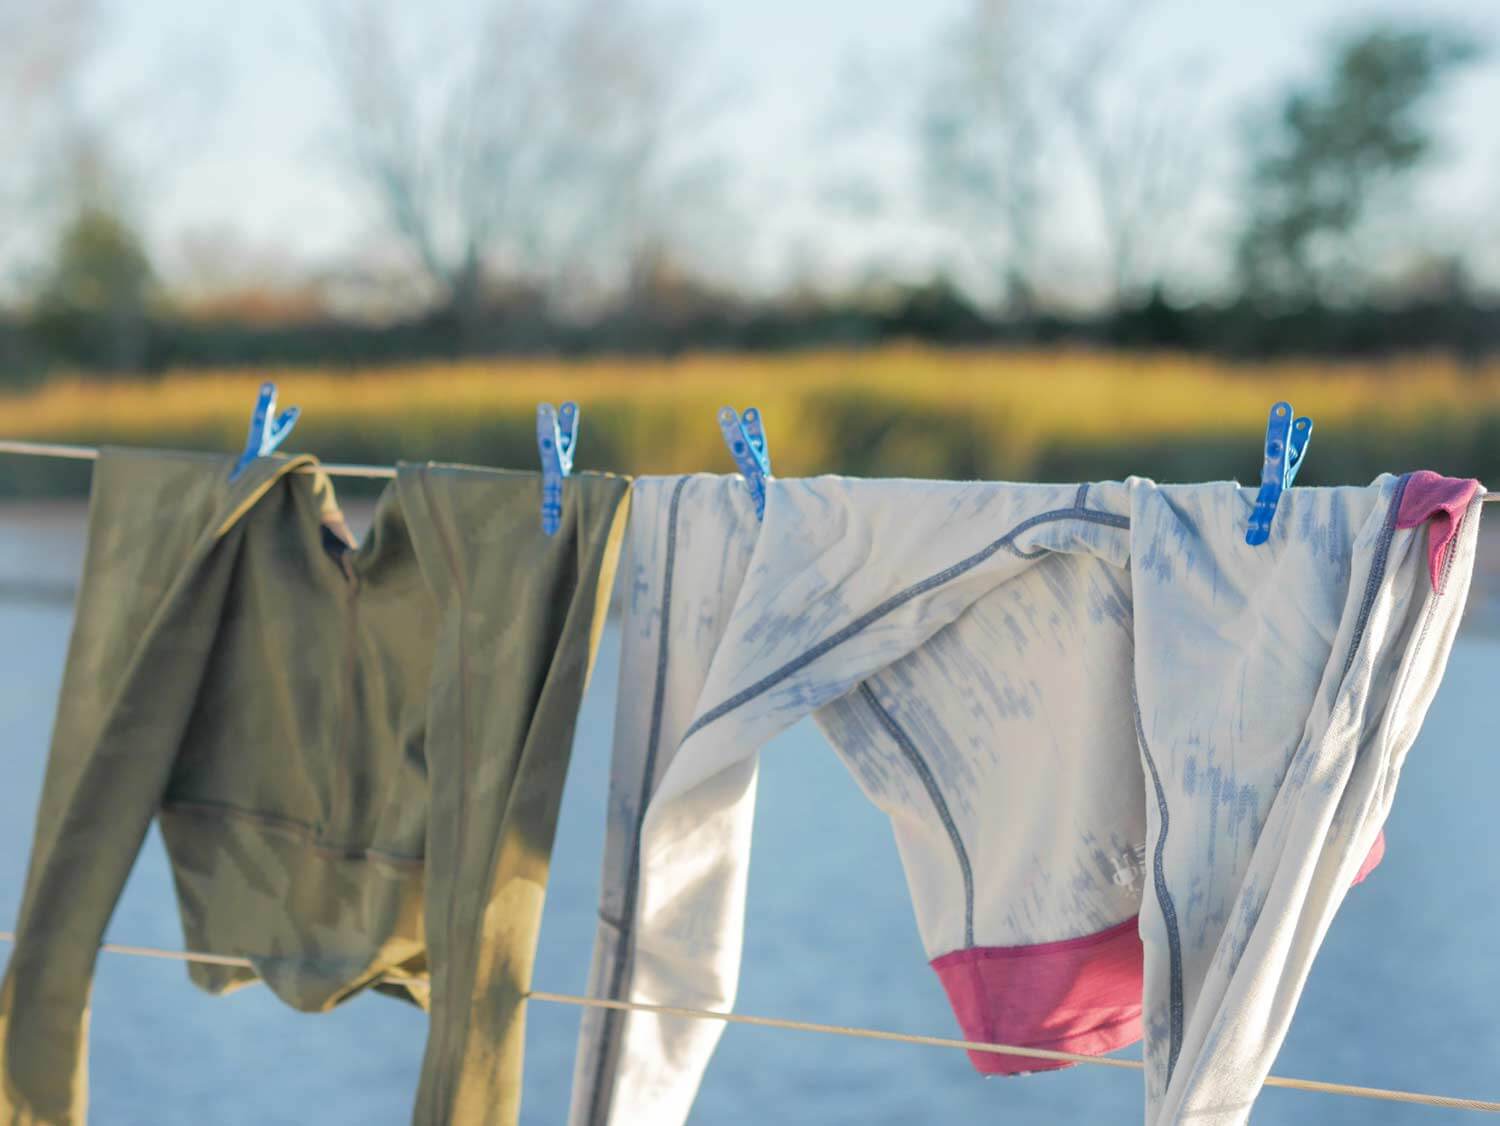 Laundry hanging to dry on the sailboat lifelines